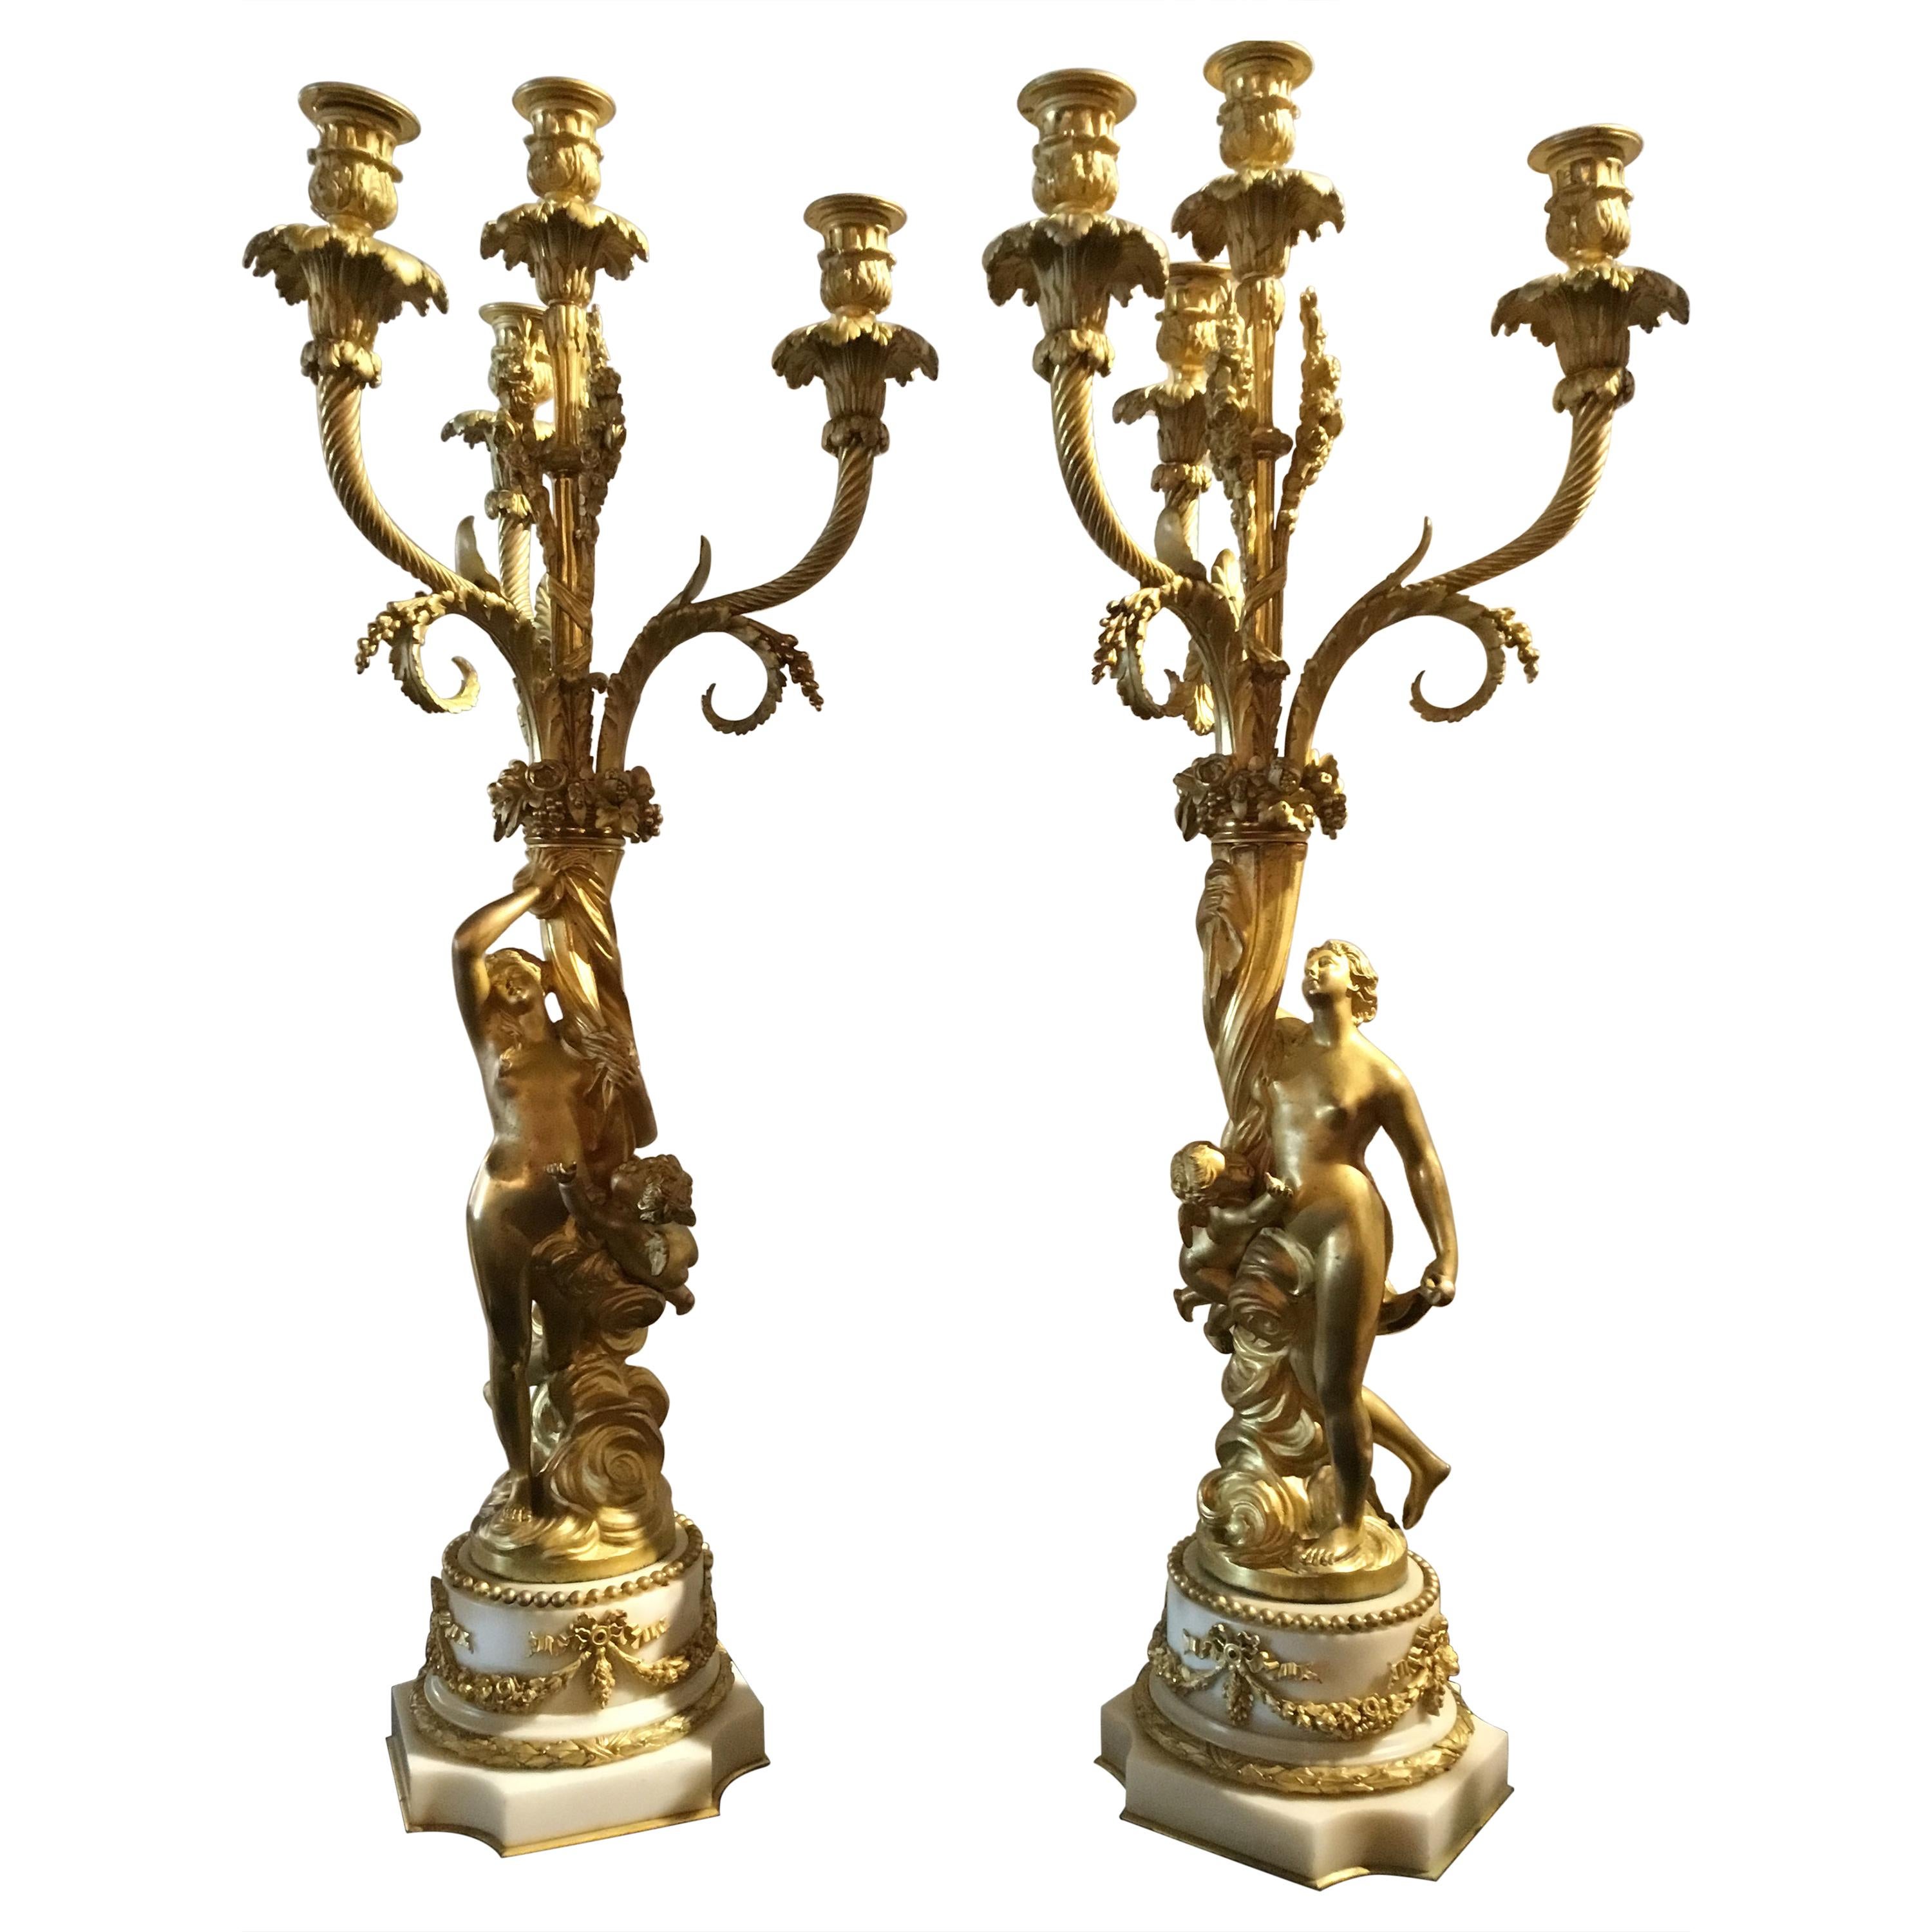 Pair of French Gilt Bronze Figural Candelabra circa 1790 on White Marble Bases